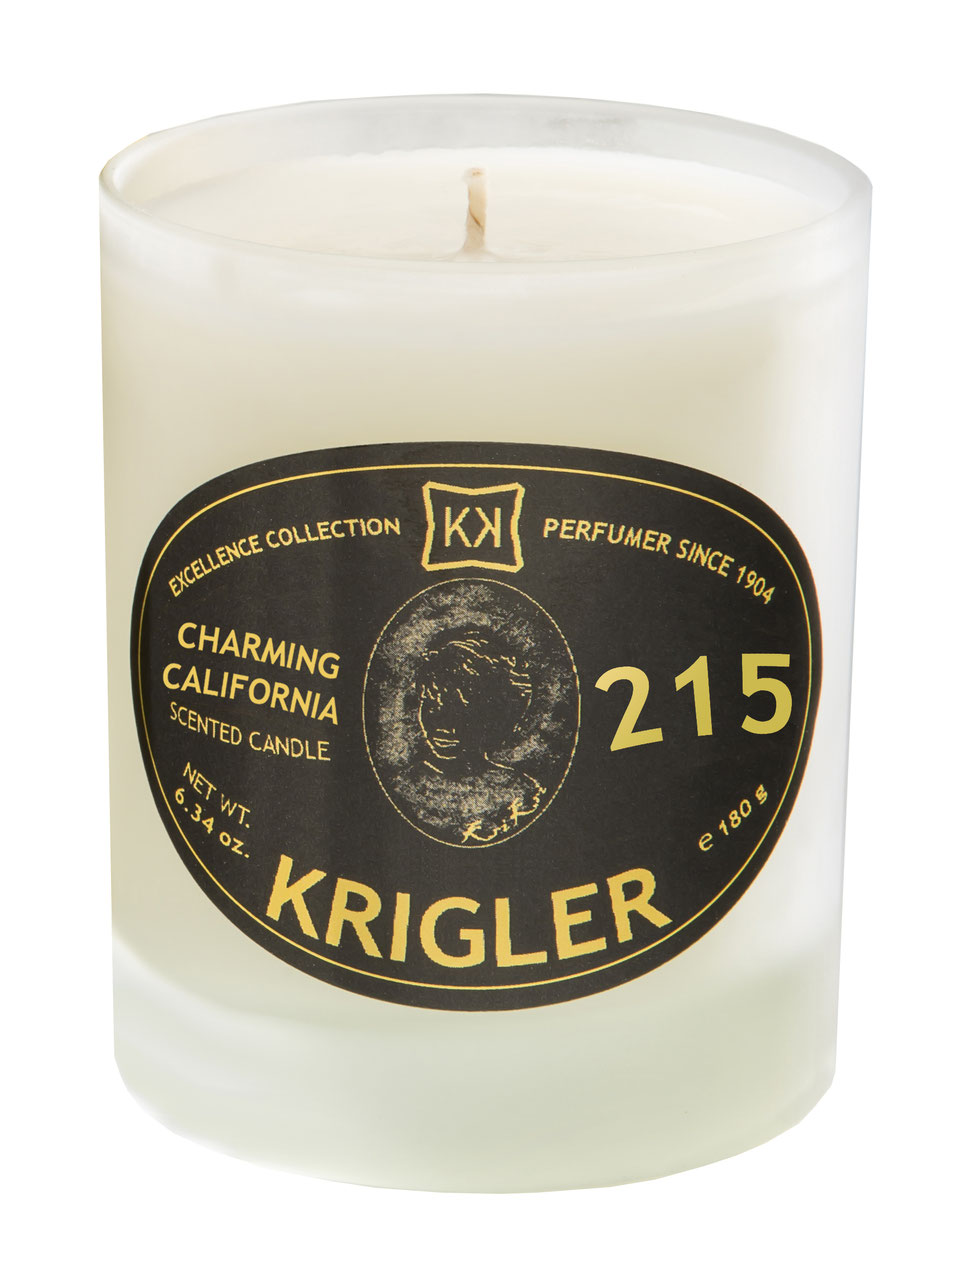 CHARMING CALIFORNIA 215 Scented candle